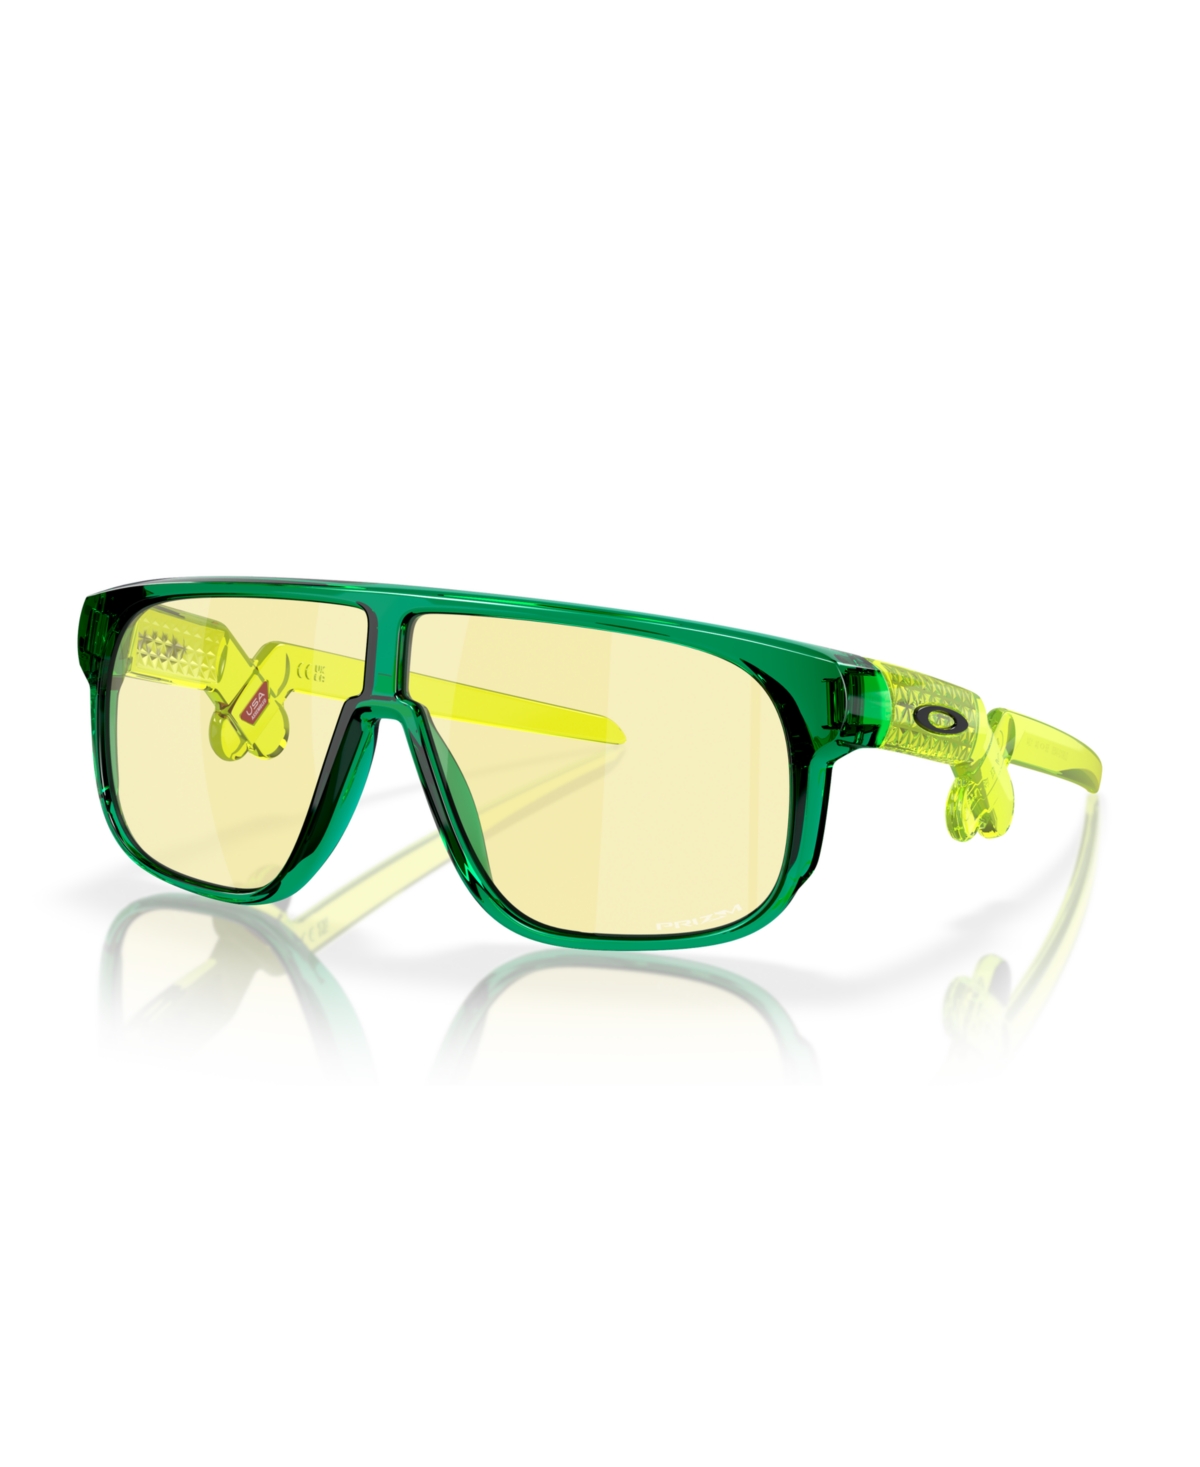 Kid's Sunglasses, Inverter Youth Fit Gaming Collection Oj9012 - Crystal Green